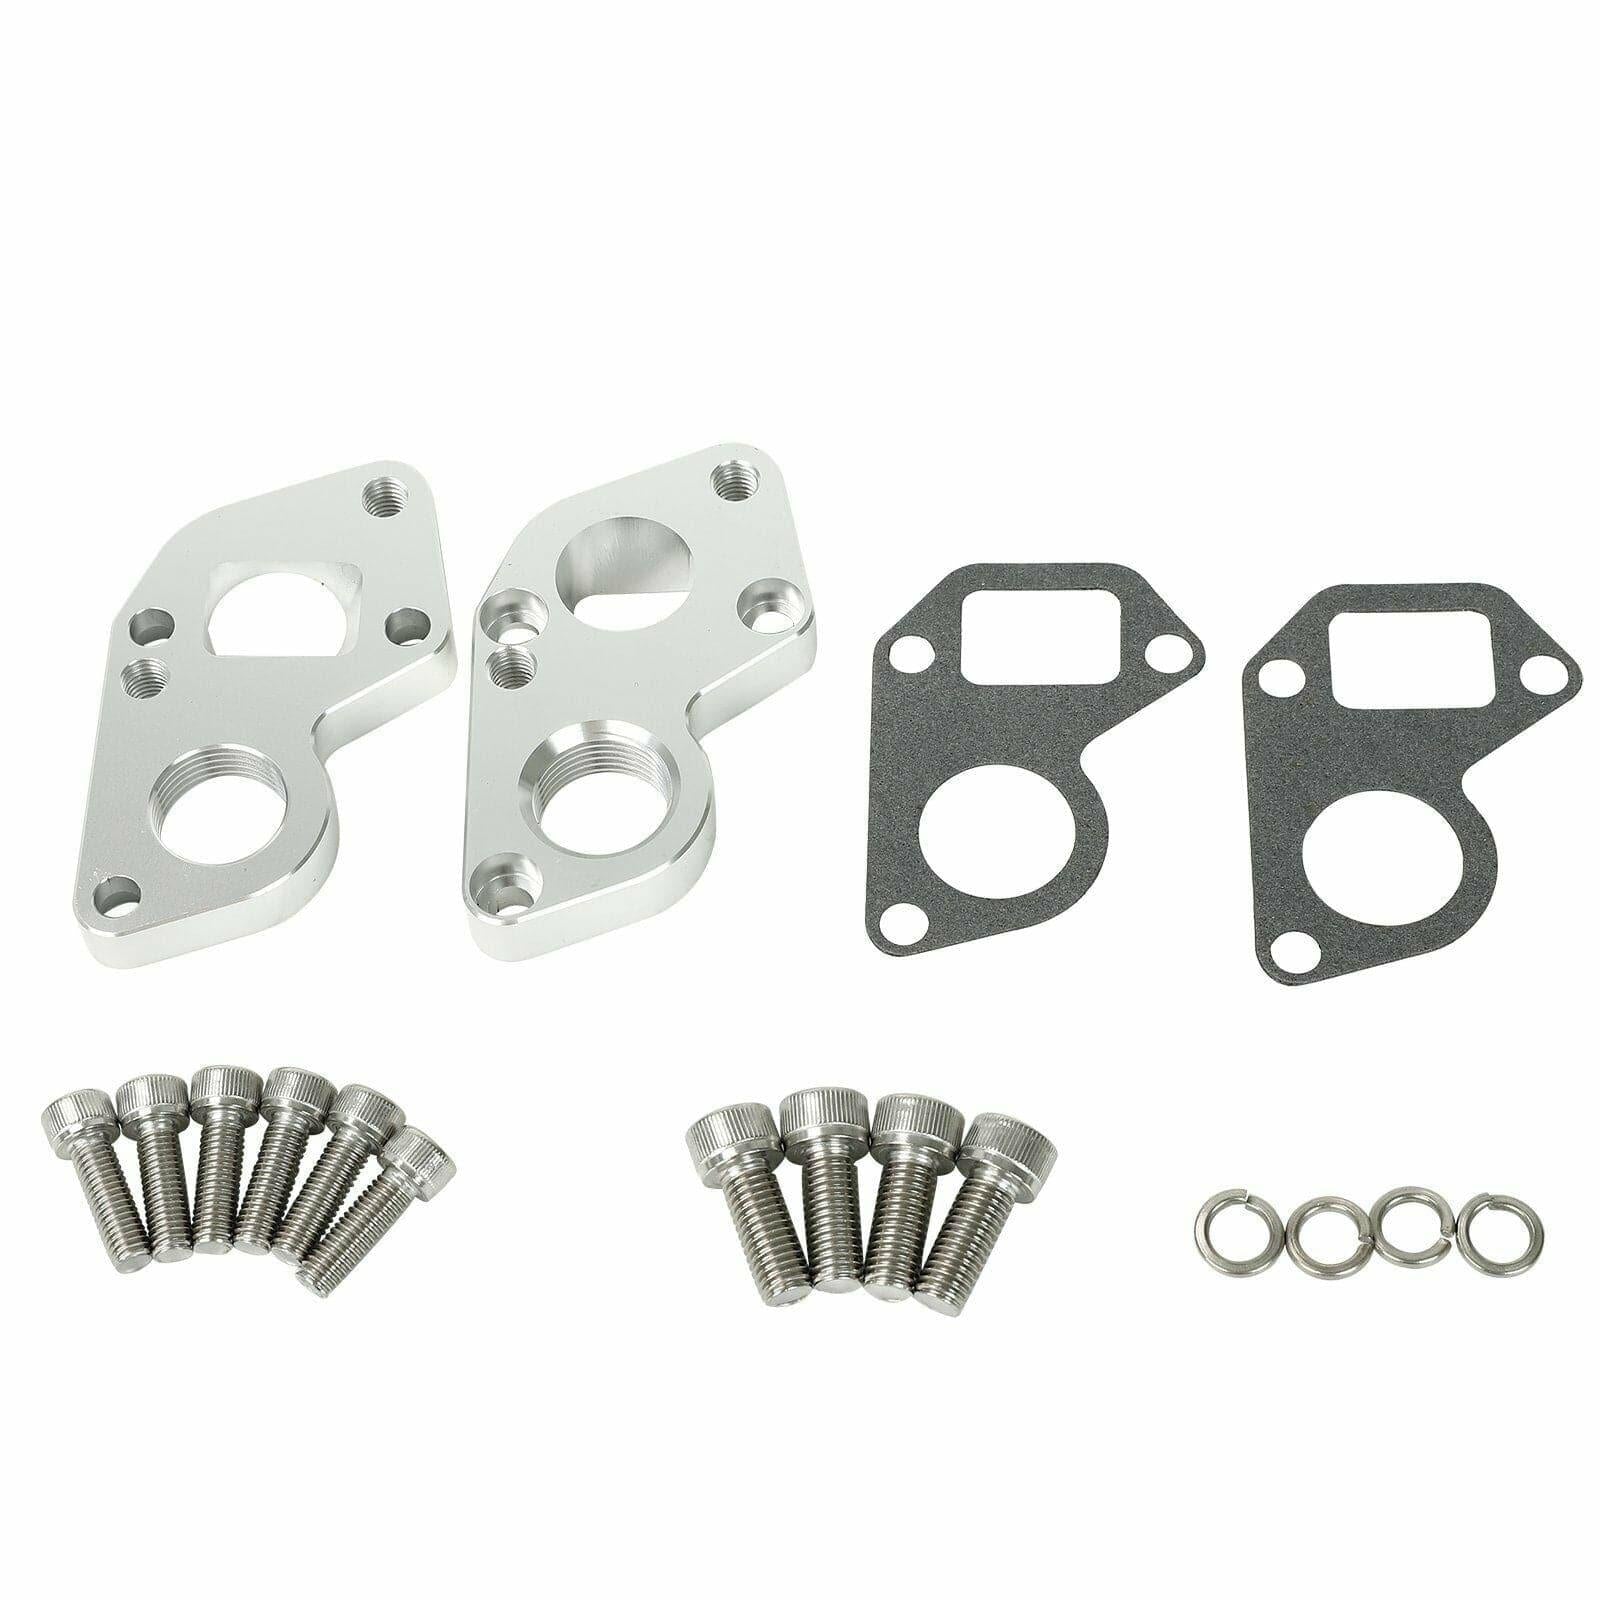 Water Pump Adapter Plate Converts For BBC to LS1 LSX Engine Silver - www.blackhorse-racing.com